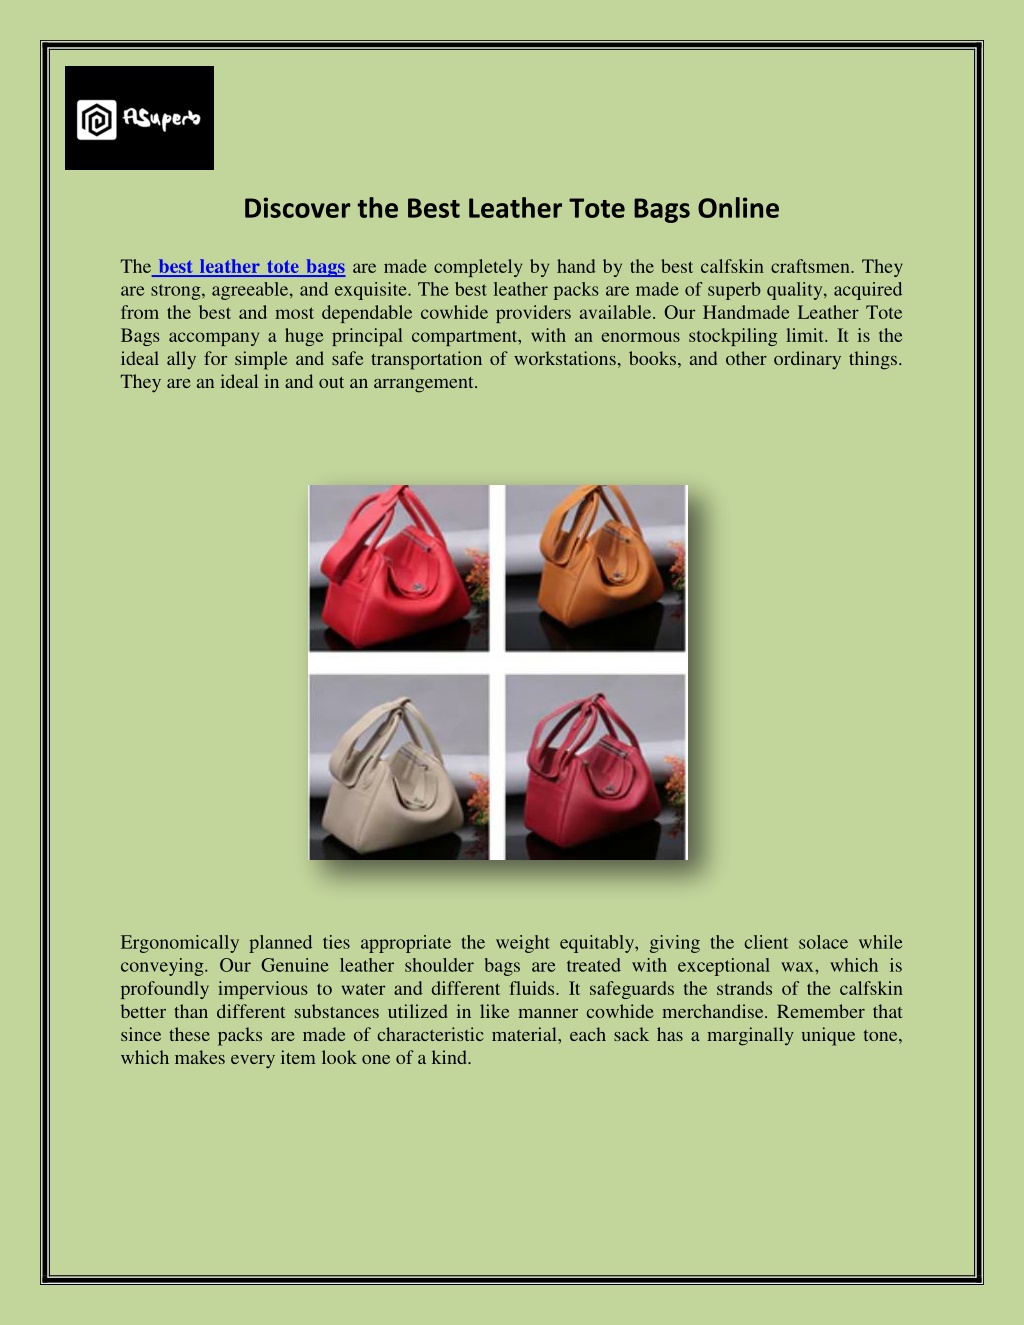 PPT - Discover the Best Leather Tote Bags Online PowerPoint ...